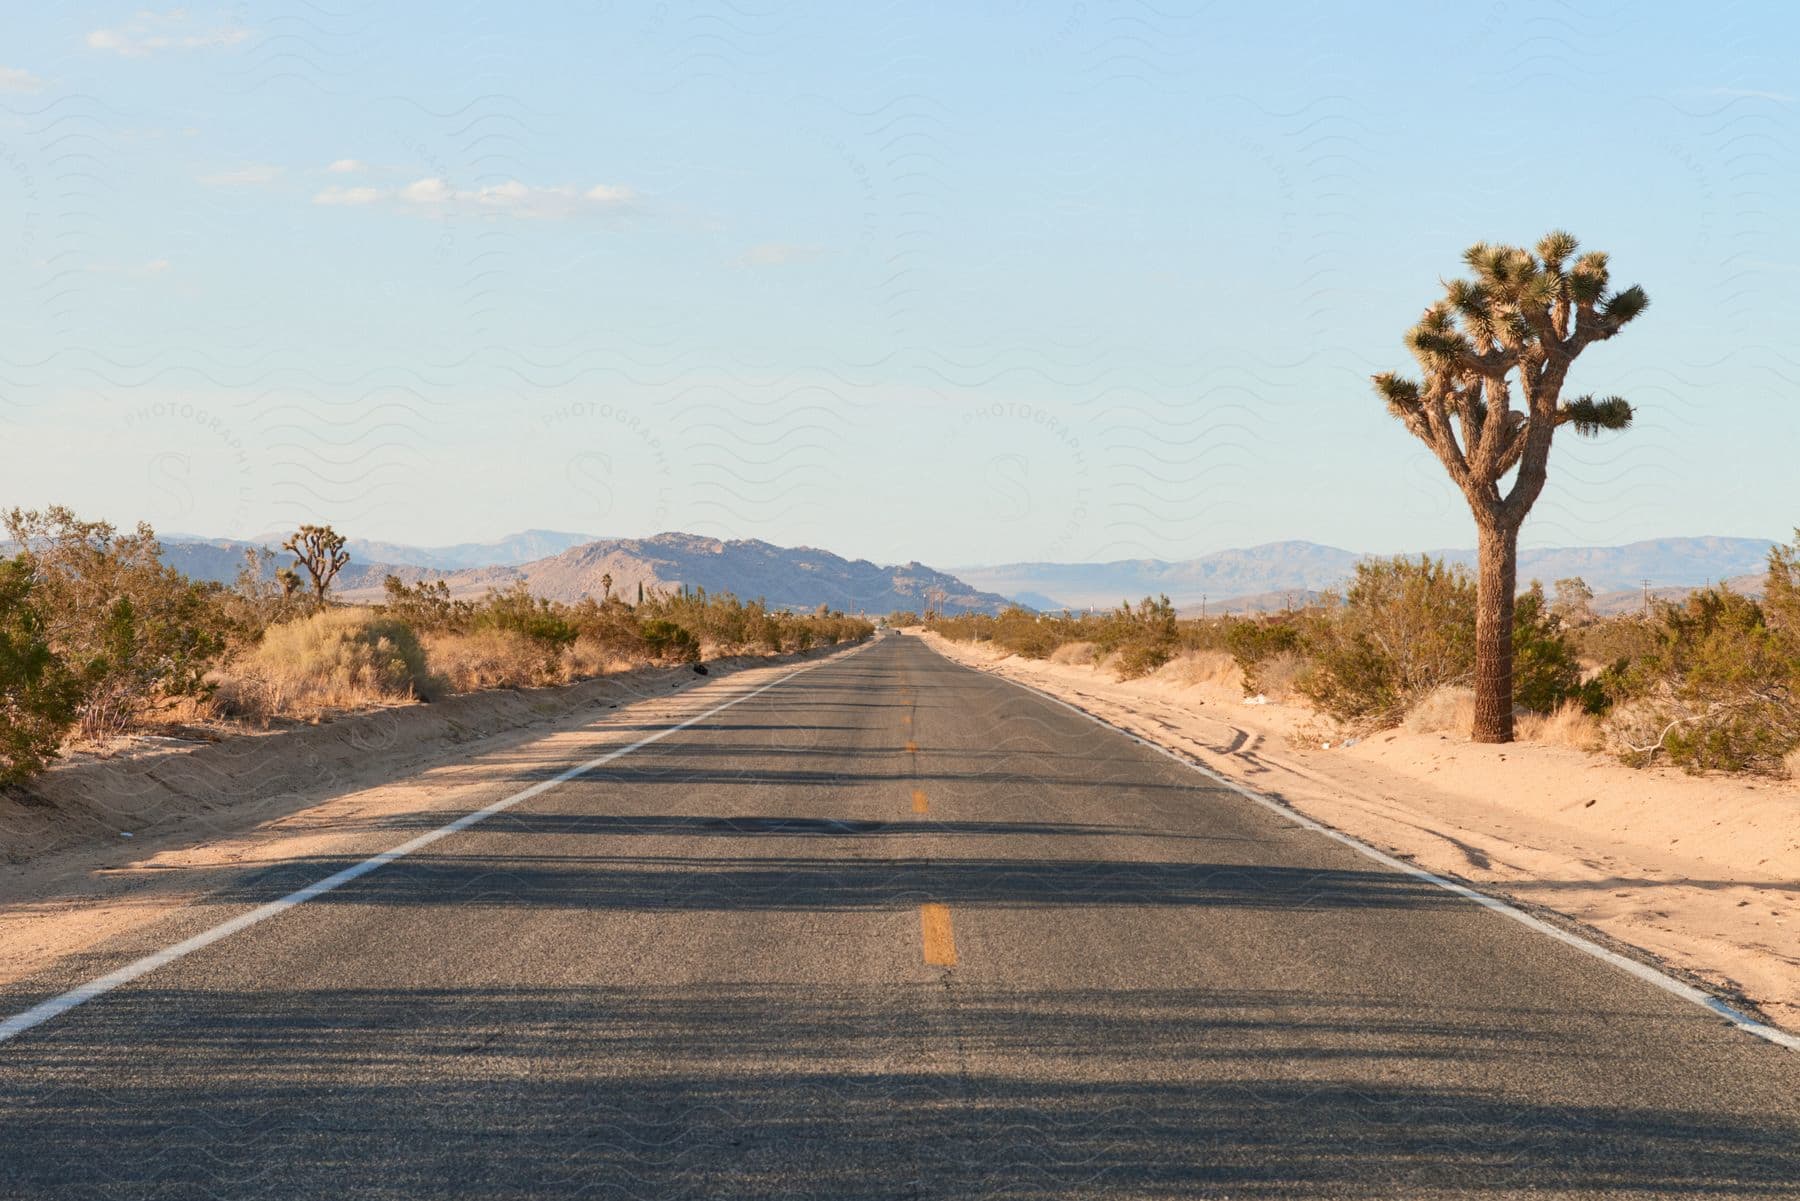 Stock photo of plants and vegetation along the side of an open road through the desert with mountains in the distance